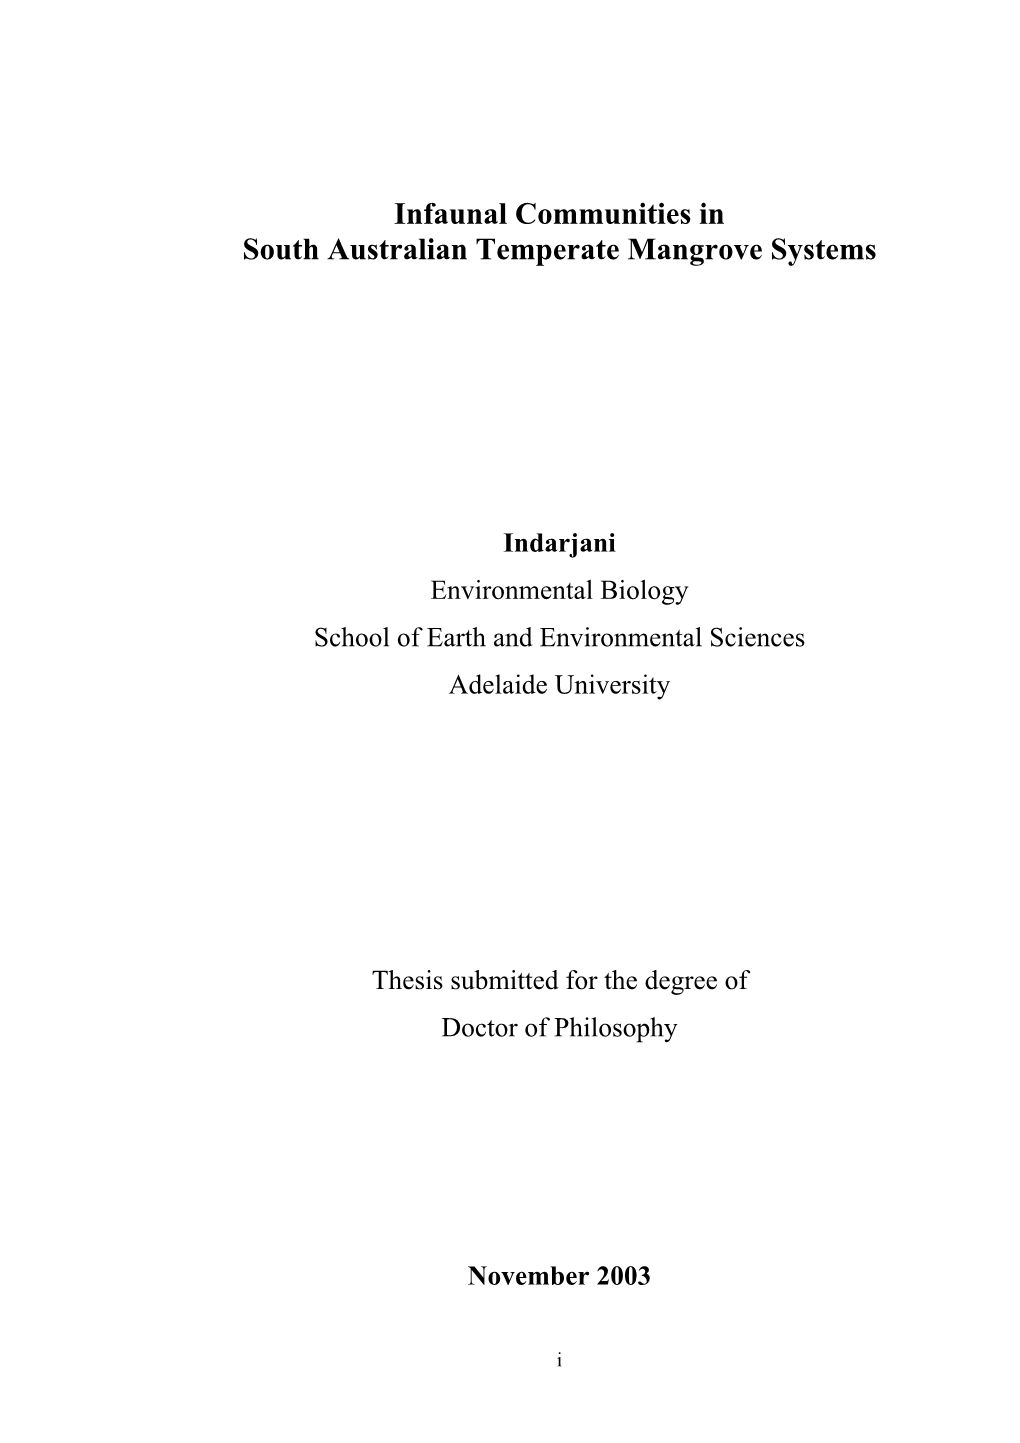 Infaunal Communities in South Australian Temperate Mangrove Systems